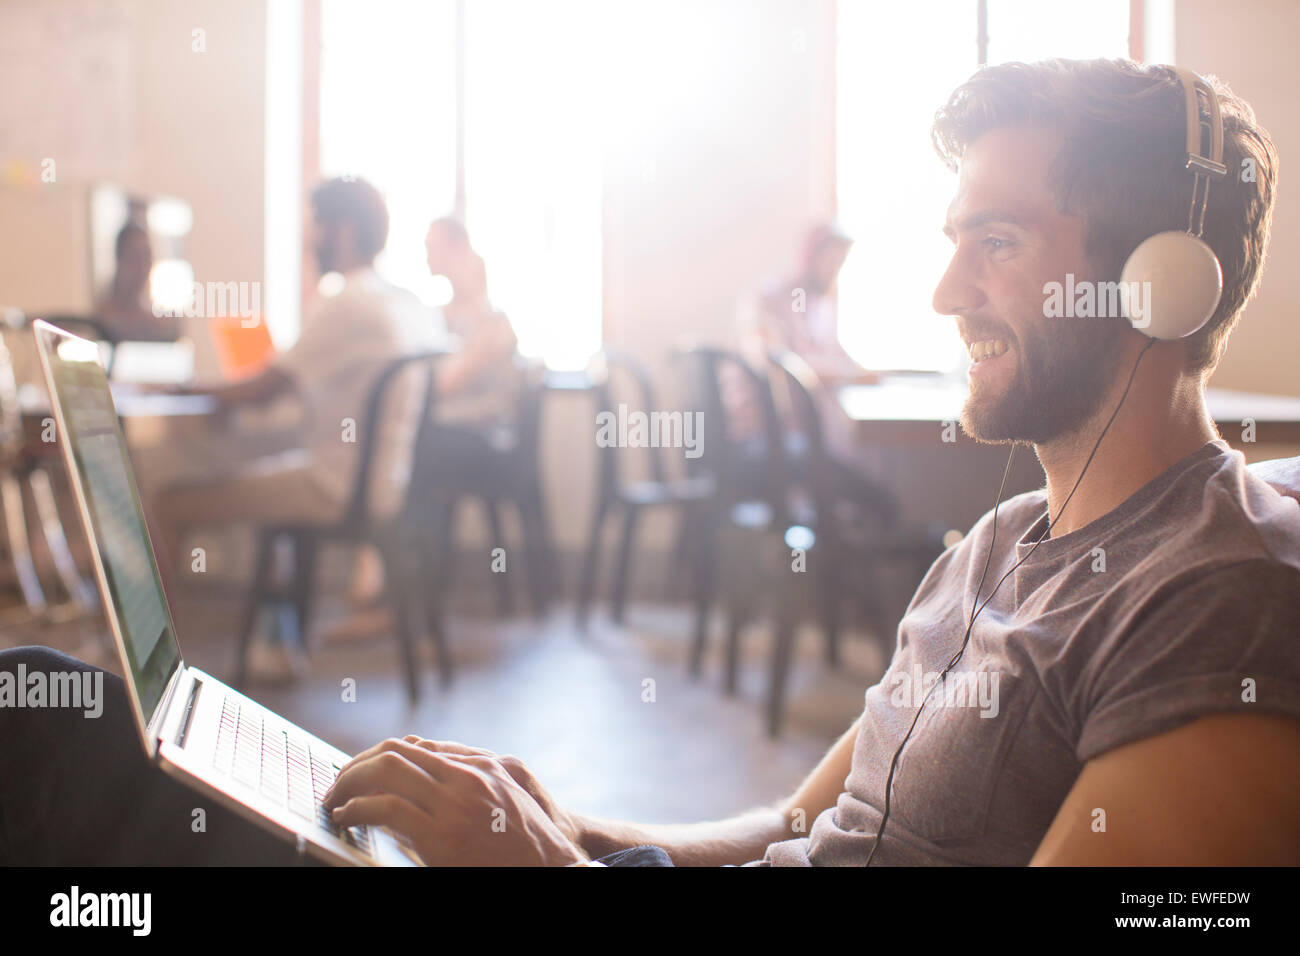 Businessman wearing headphones et working at laptop in office Banque D'Images